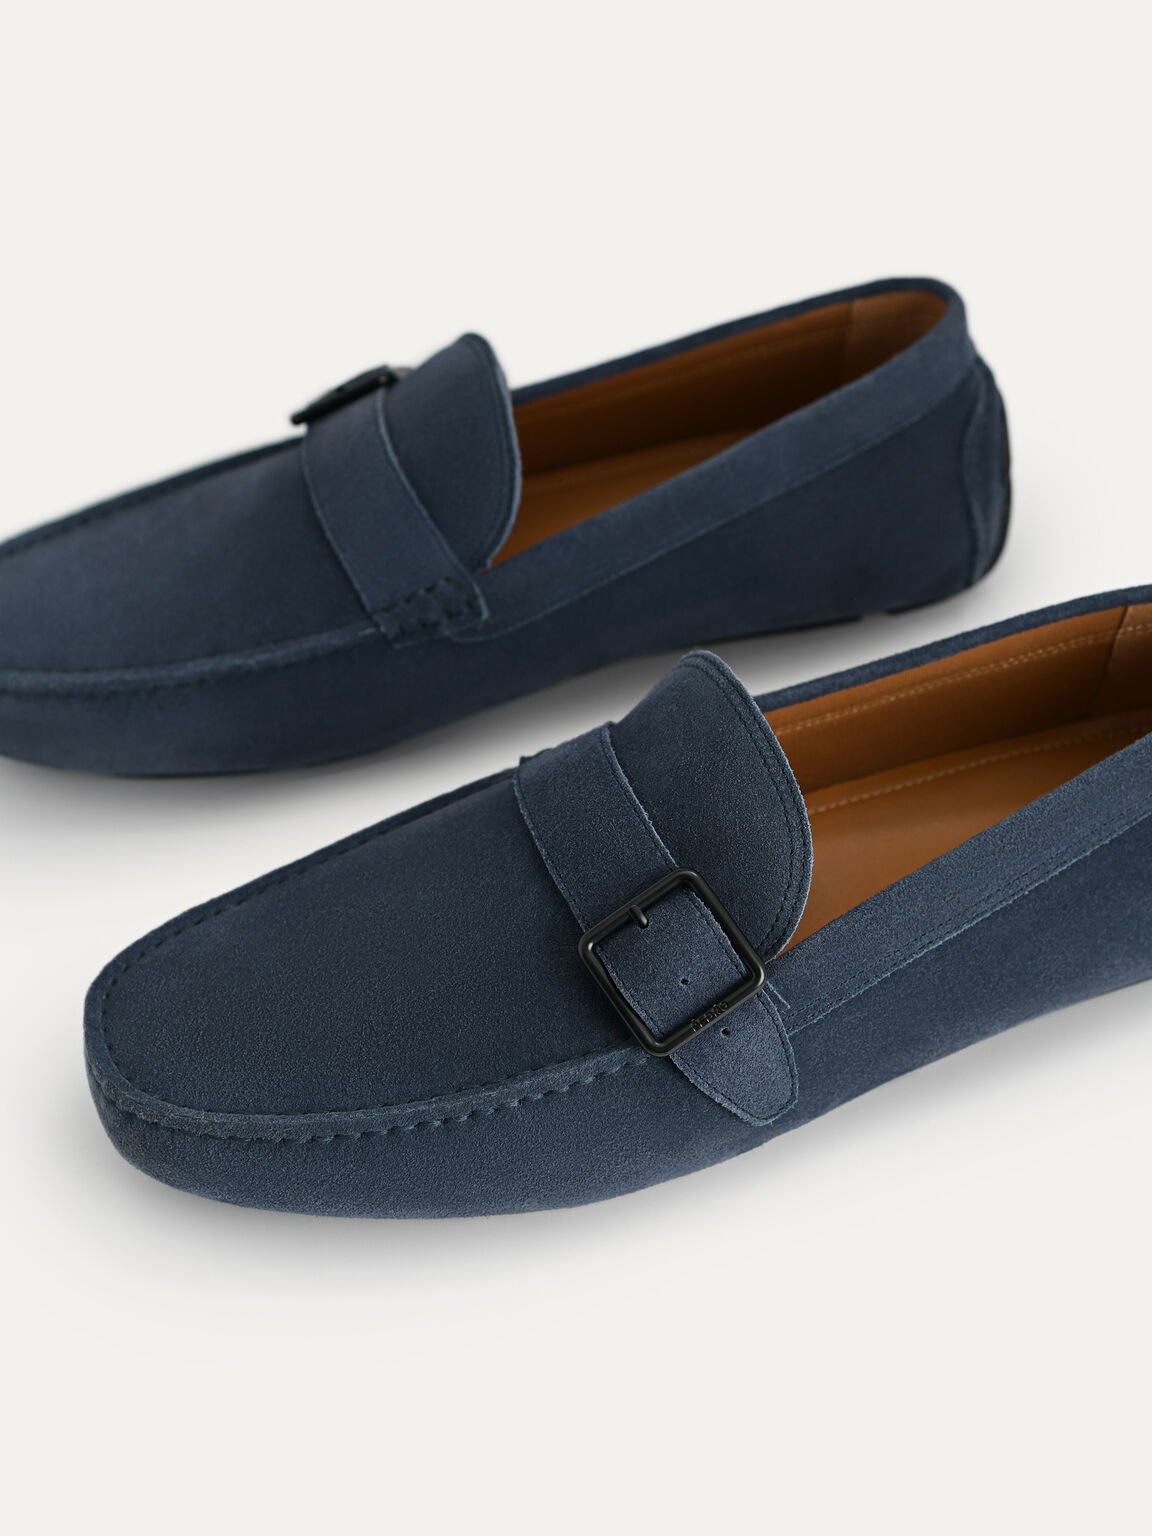 Suede Leather Moccasins with Buckle Detailing, Navy